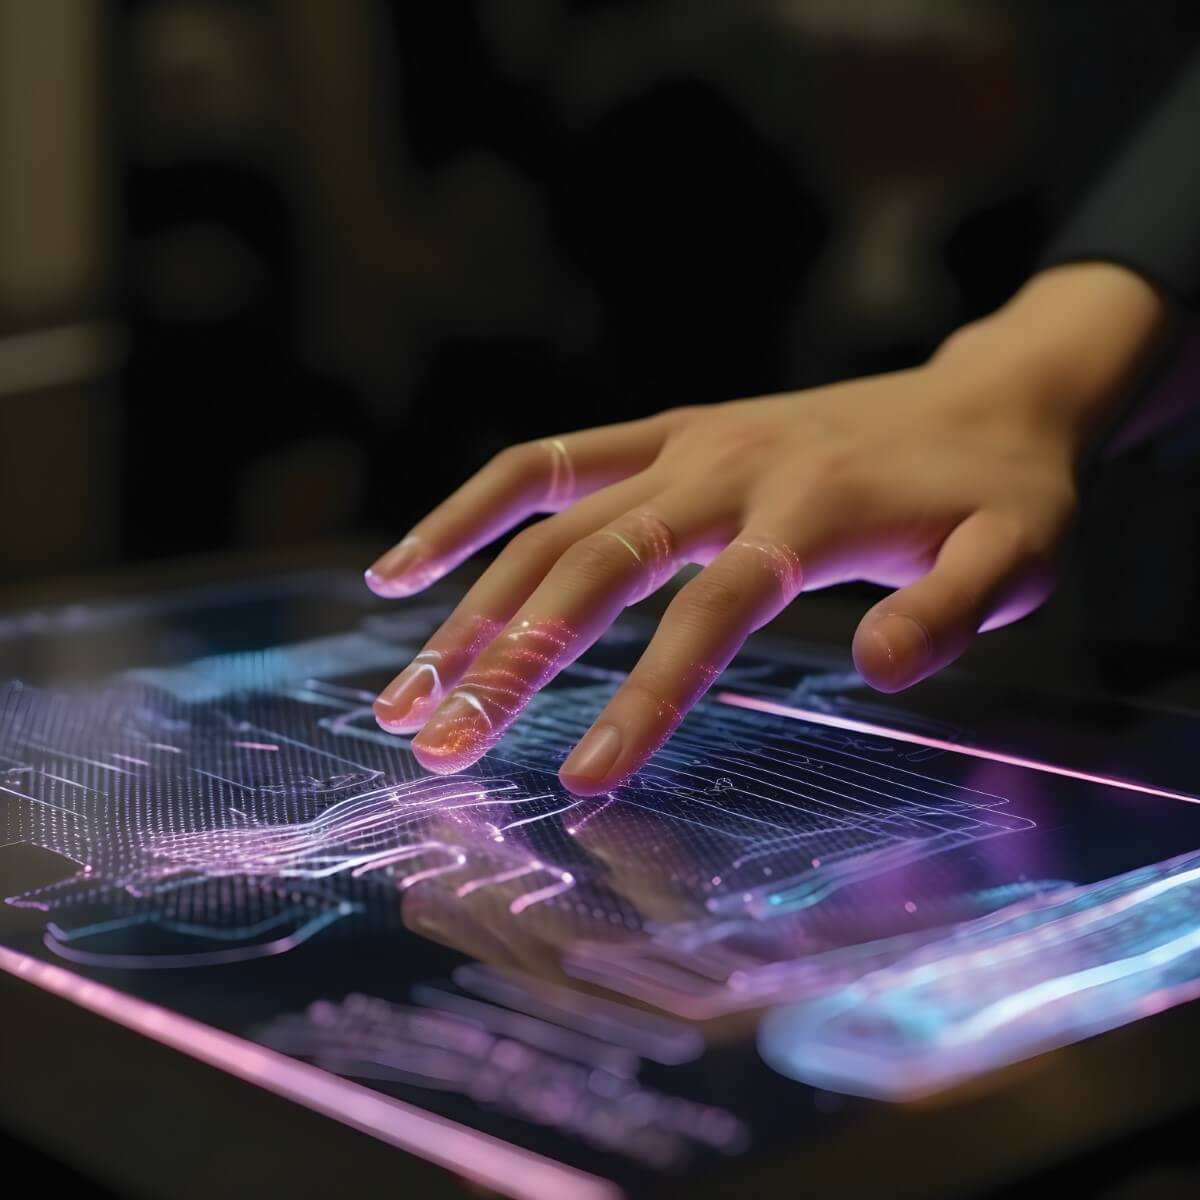 a close-up shot of a hand using a tablet, featuring cyber-looking lines and a purple and blue glow.